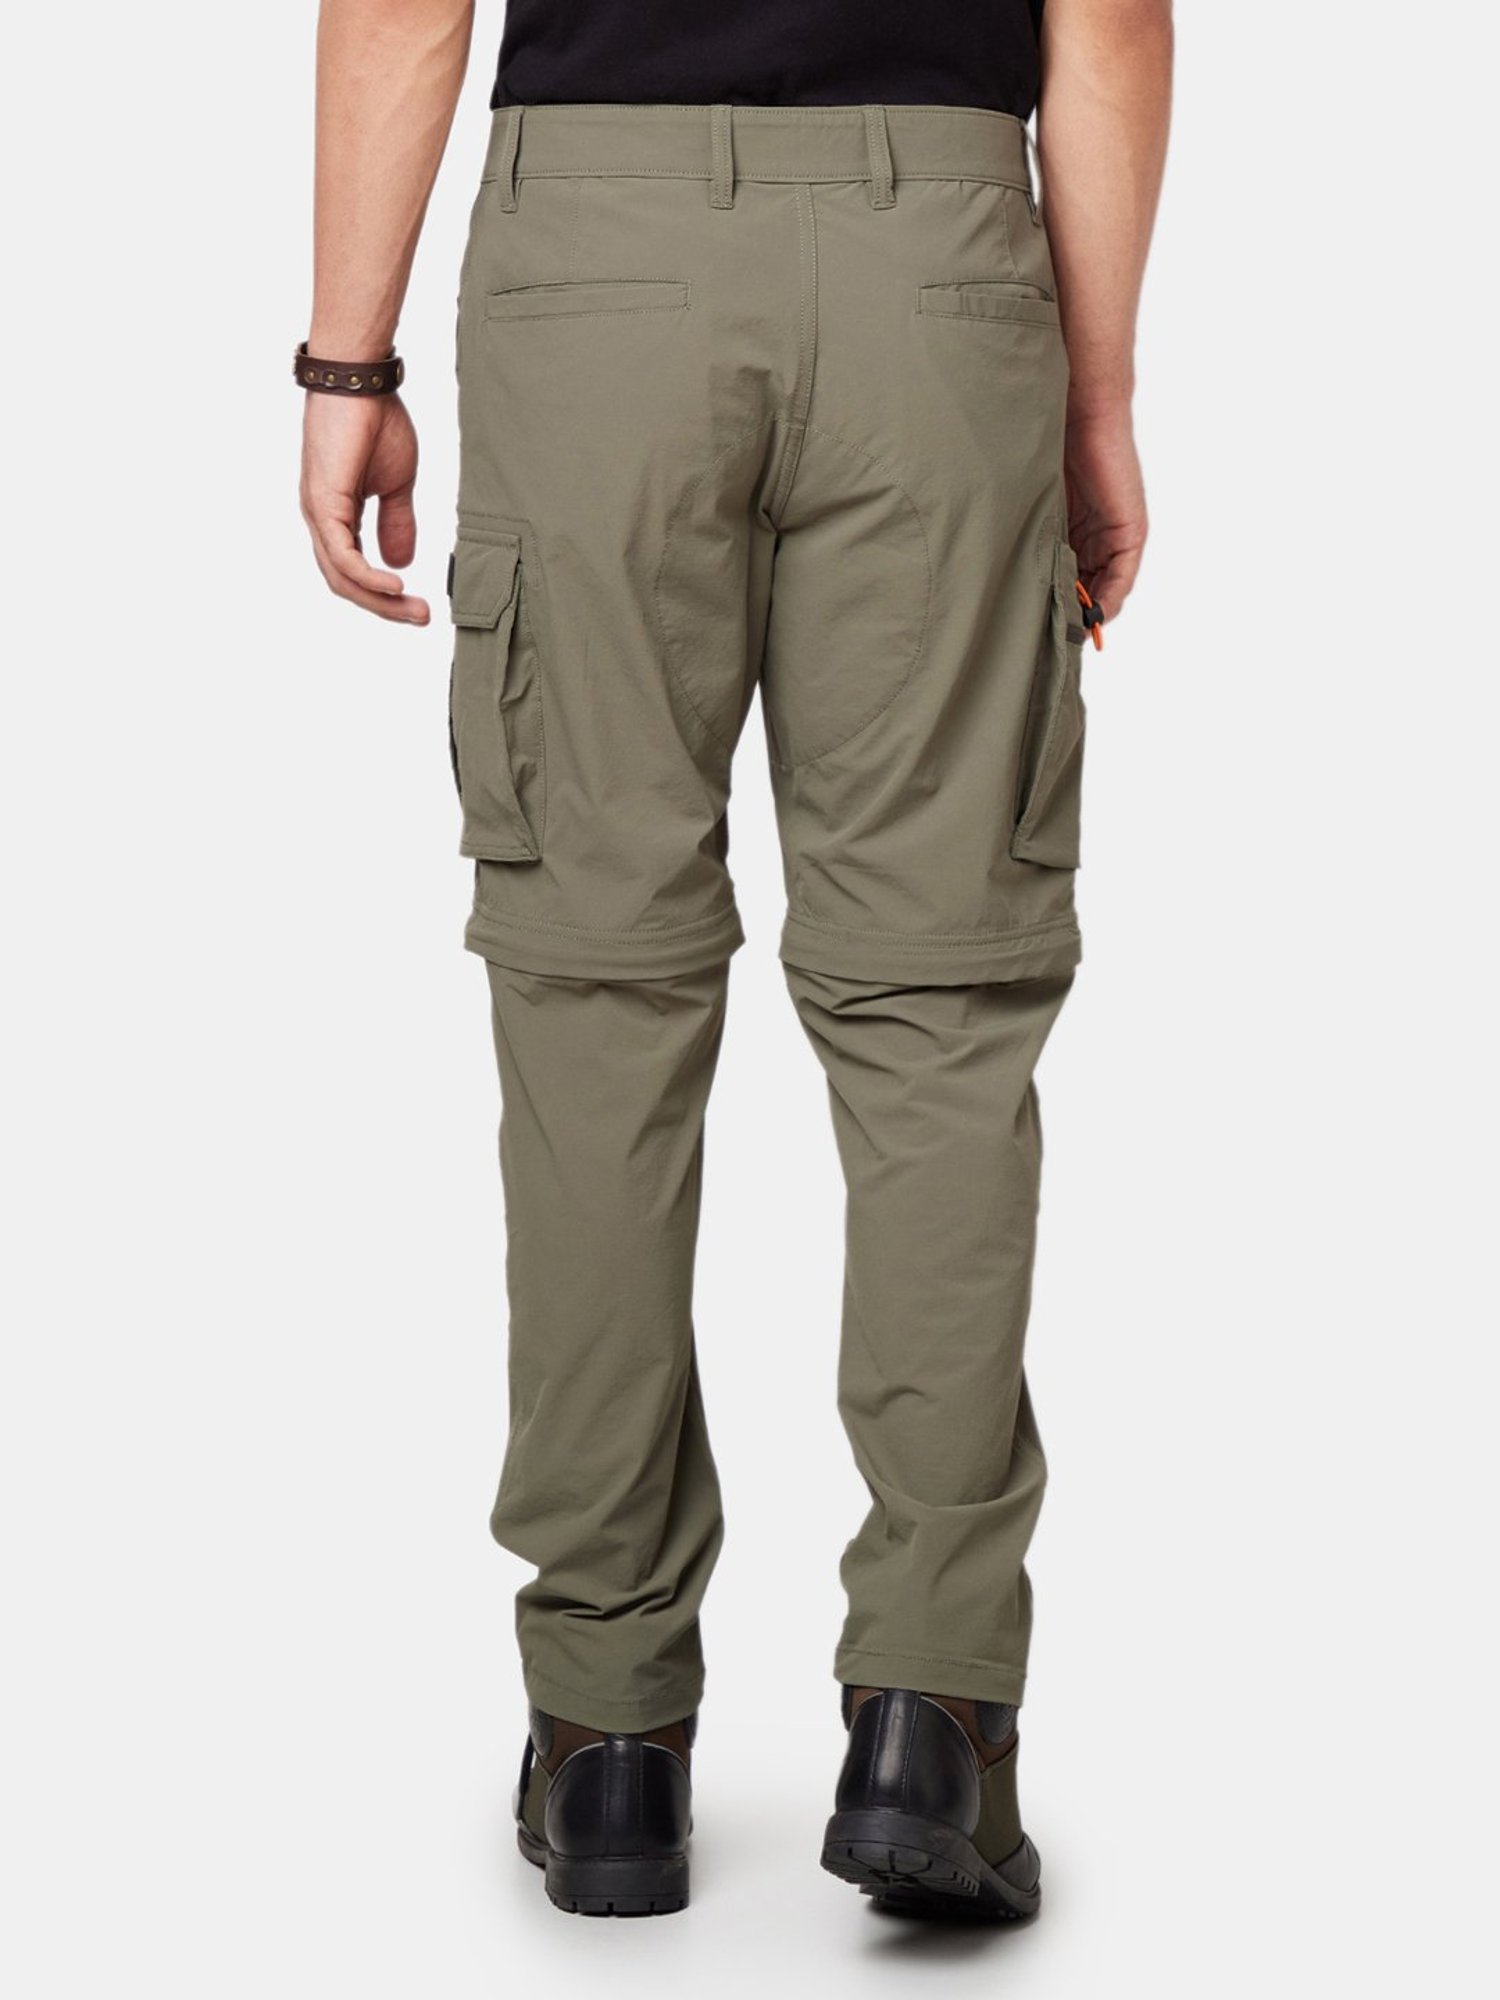 Royal Enfield Jackets Track Trousers  Buy Royal Enfield Jackets Track  Trousers online in India